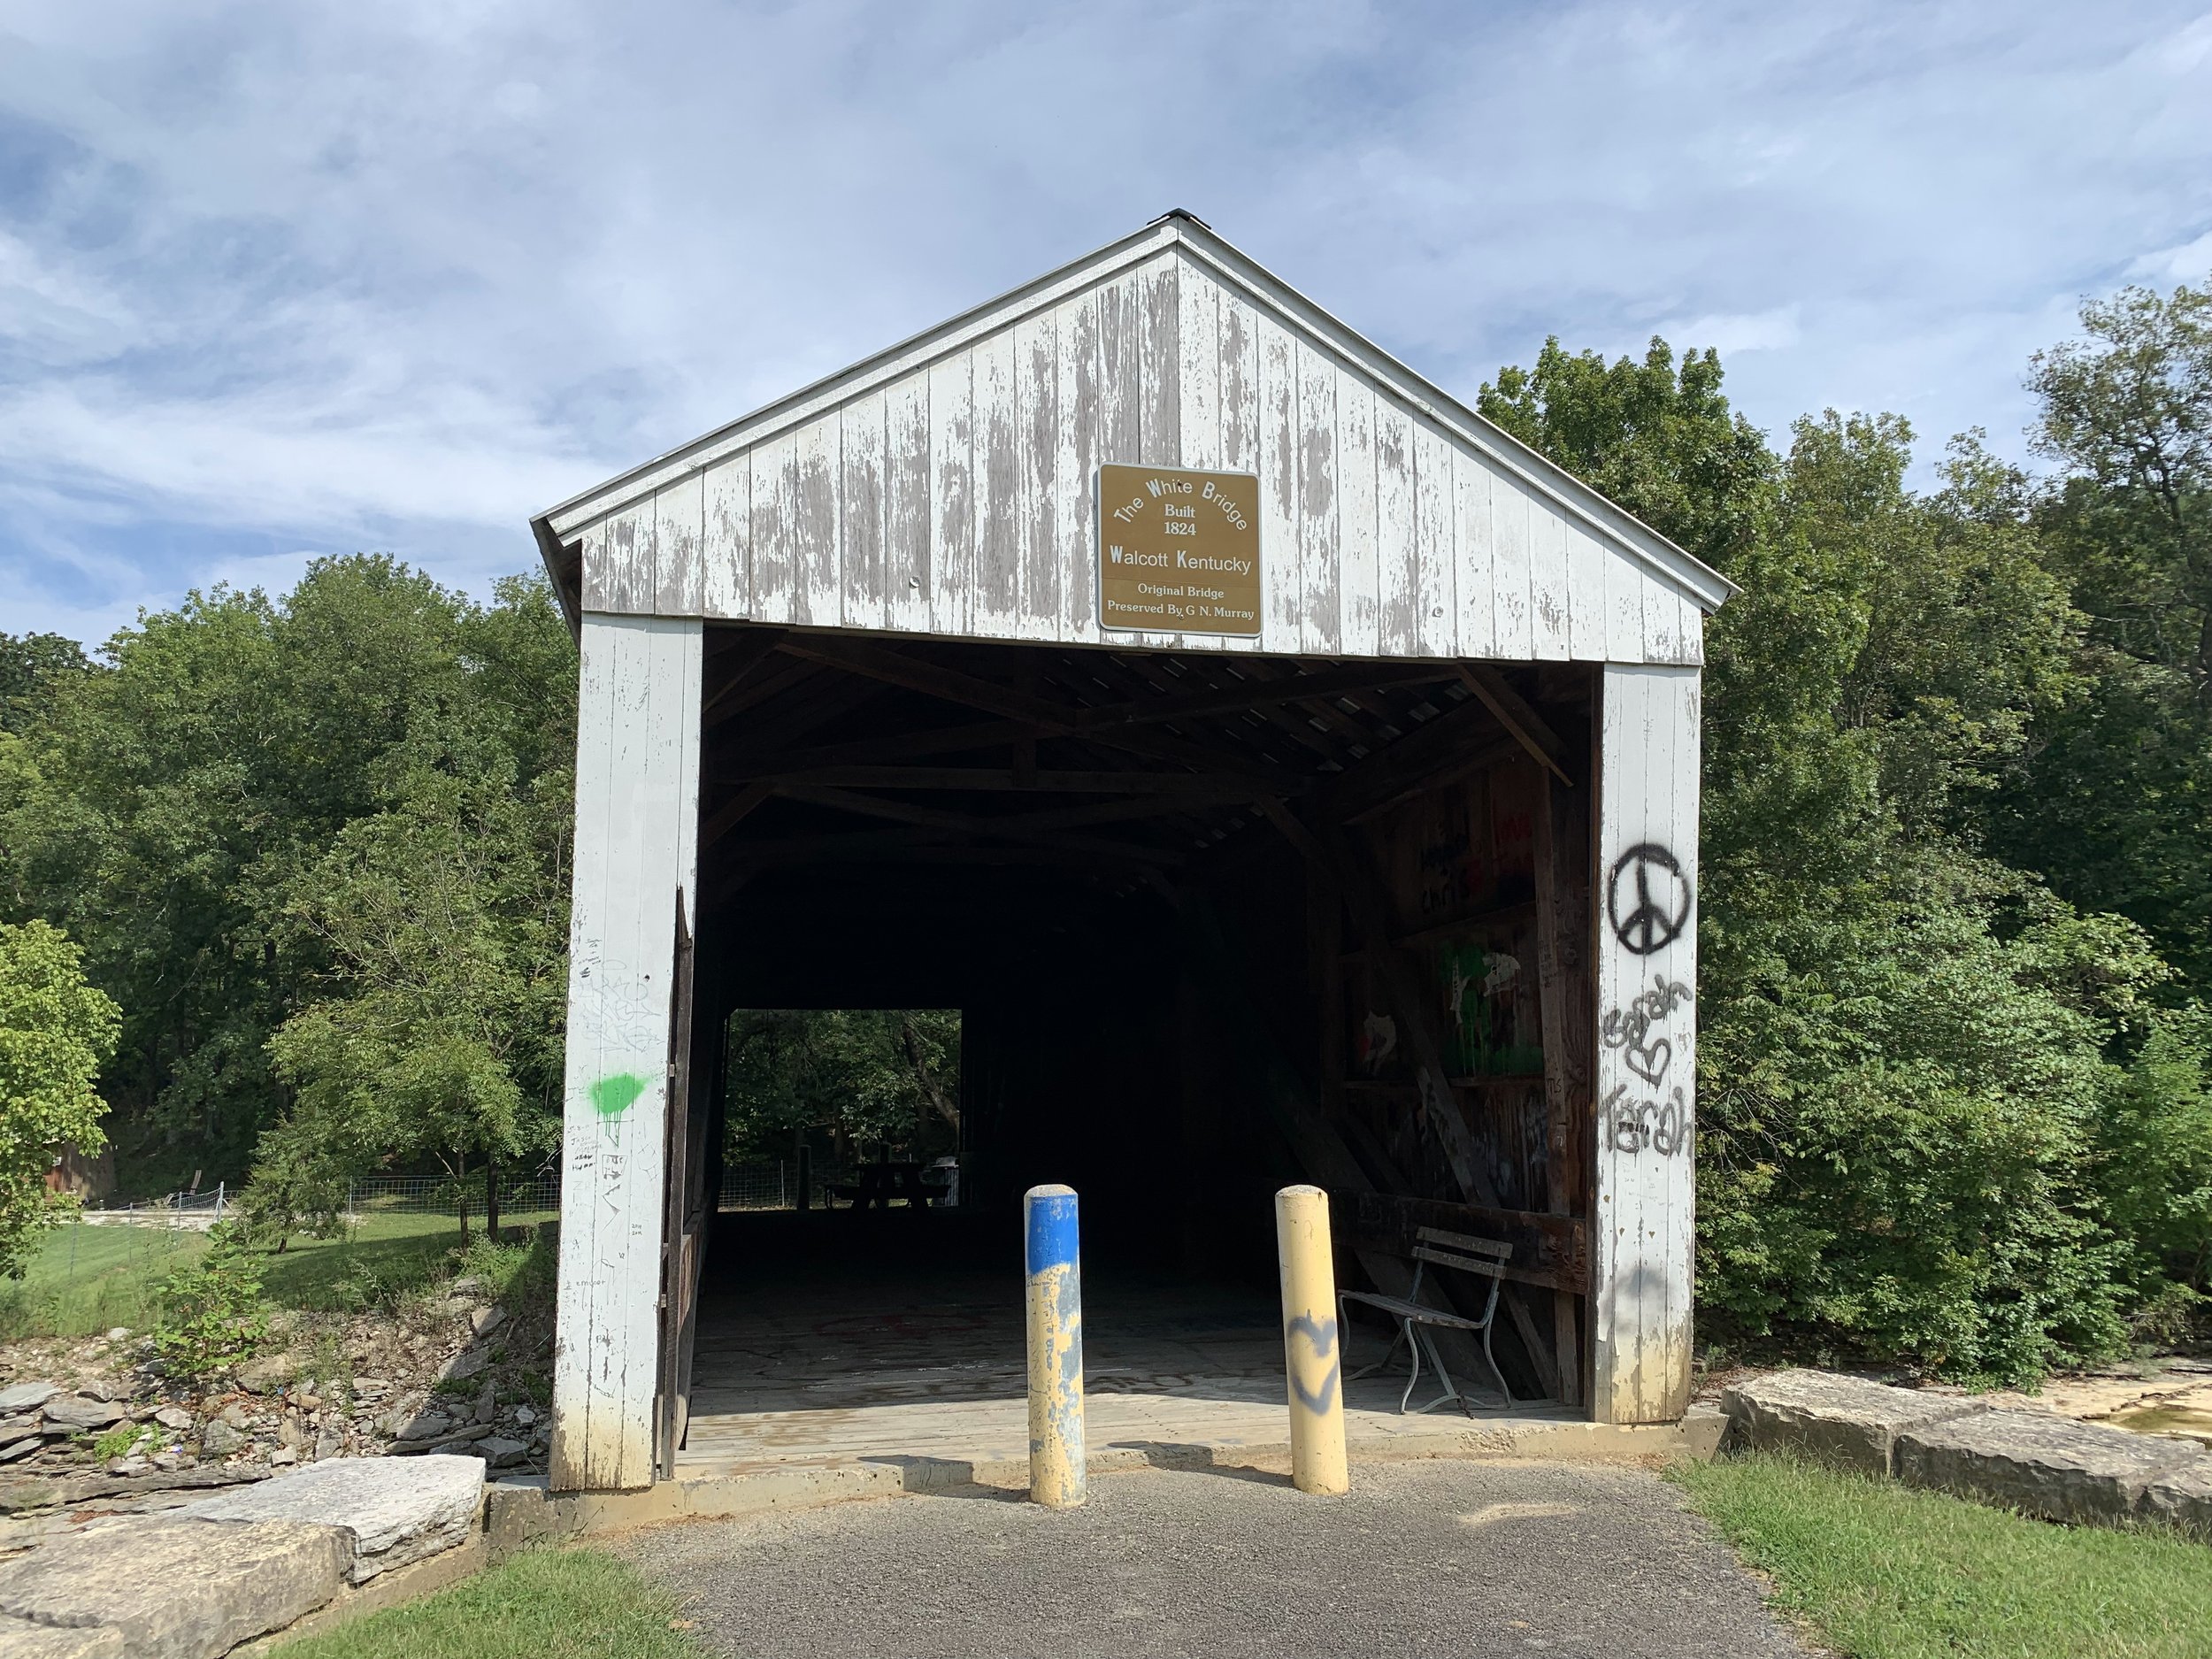 Entrance to the Bridge's South Side